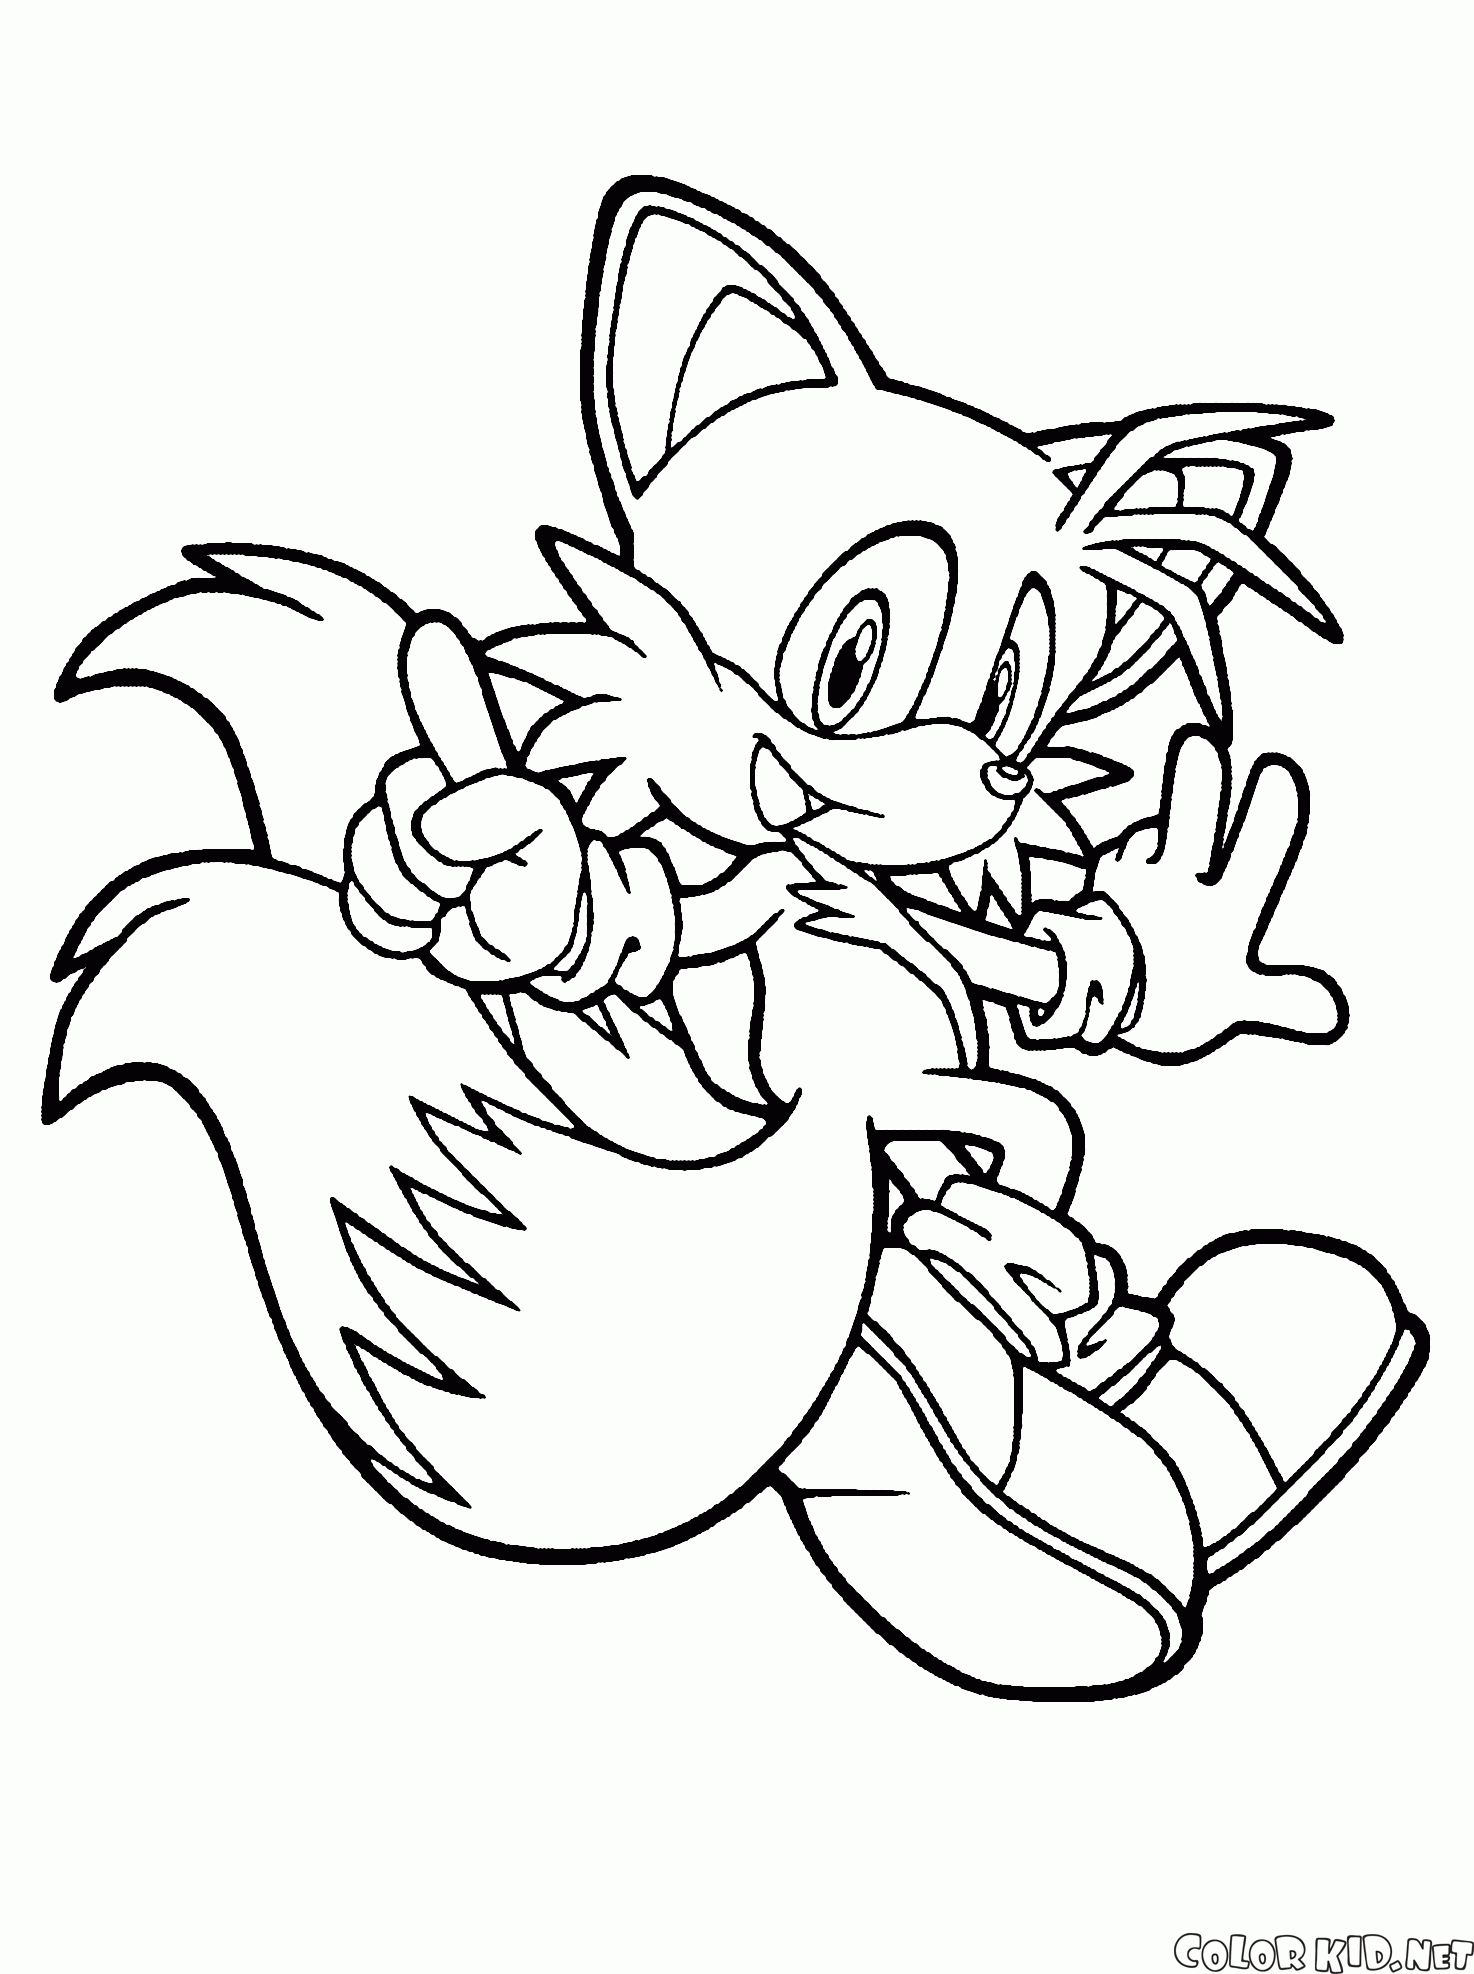 Sonic Tails Coloring Pages - Coloring Home